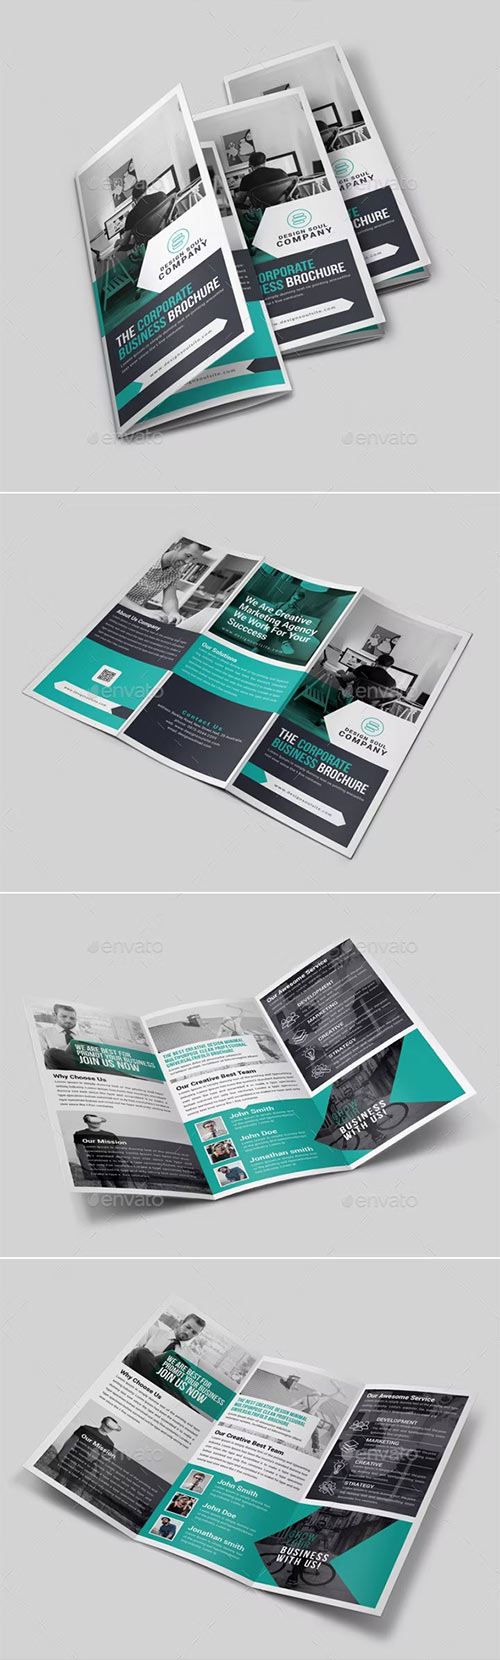 Trifold Brochure 20197908